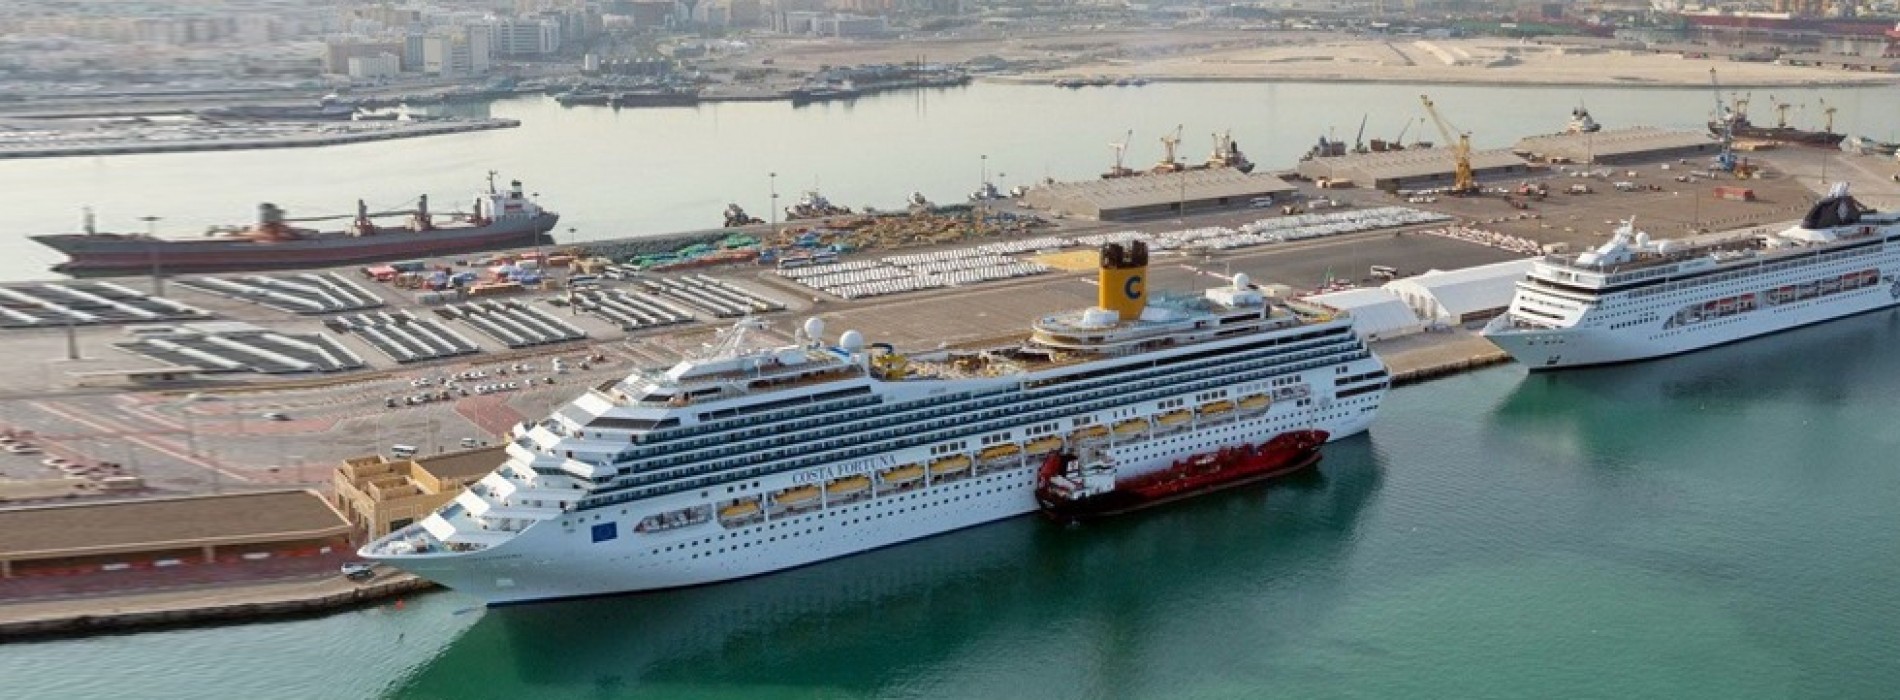 Dubai bets big on cruise tourism to attract 20 m visitors by 2020